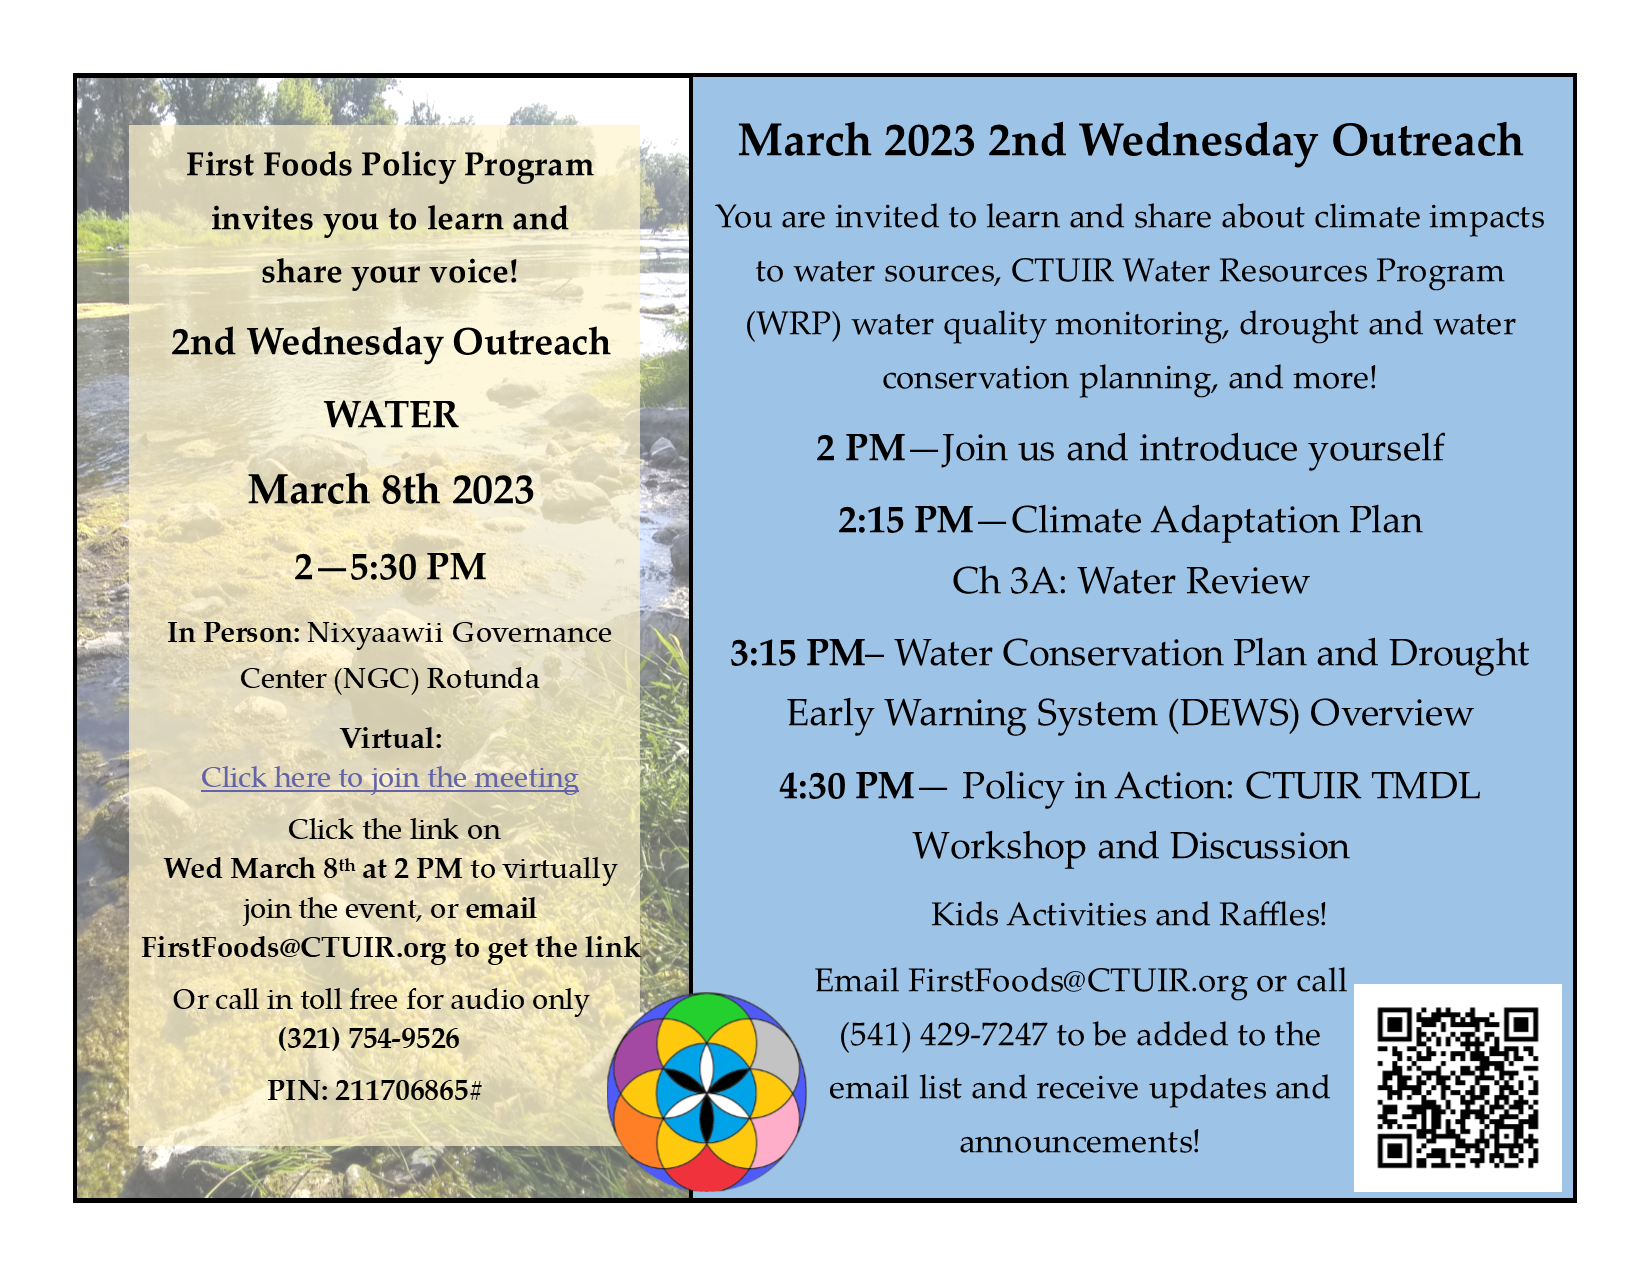 outreach flyer for March 8th from 2 to 5:30 PM held in person at the NGC rotunda and virtually